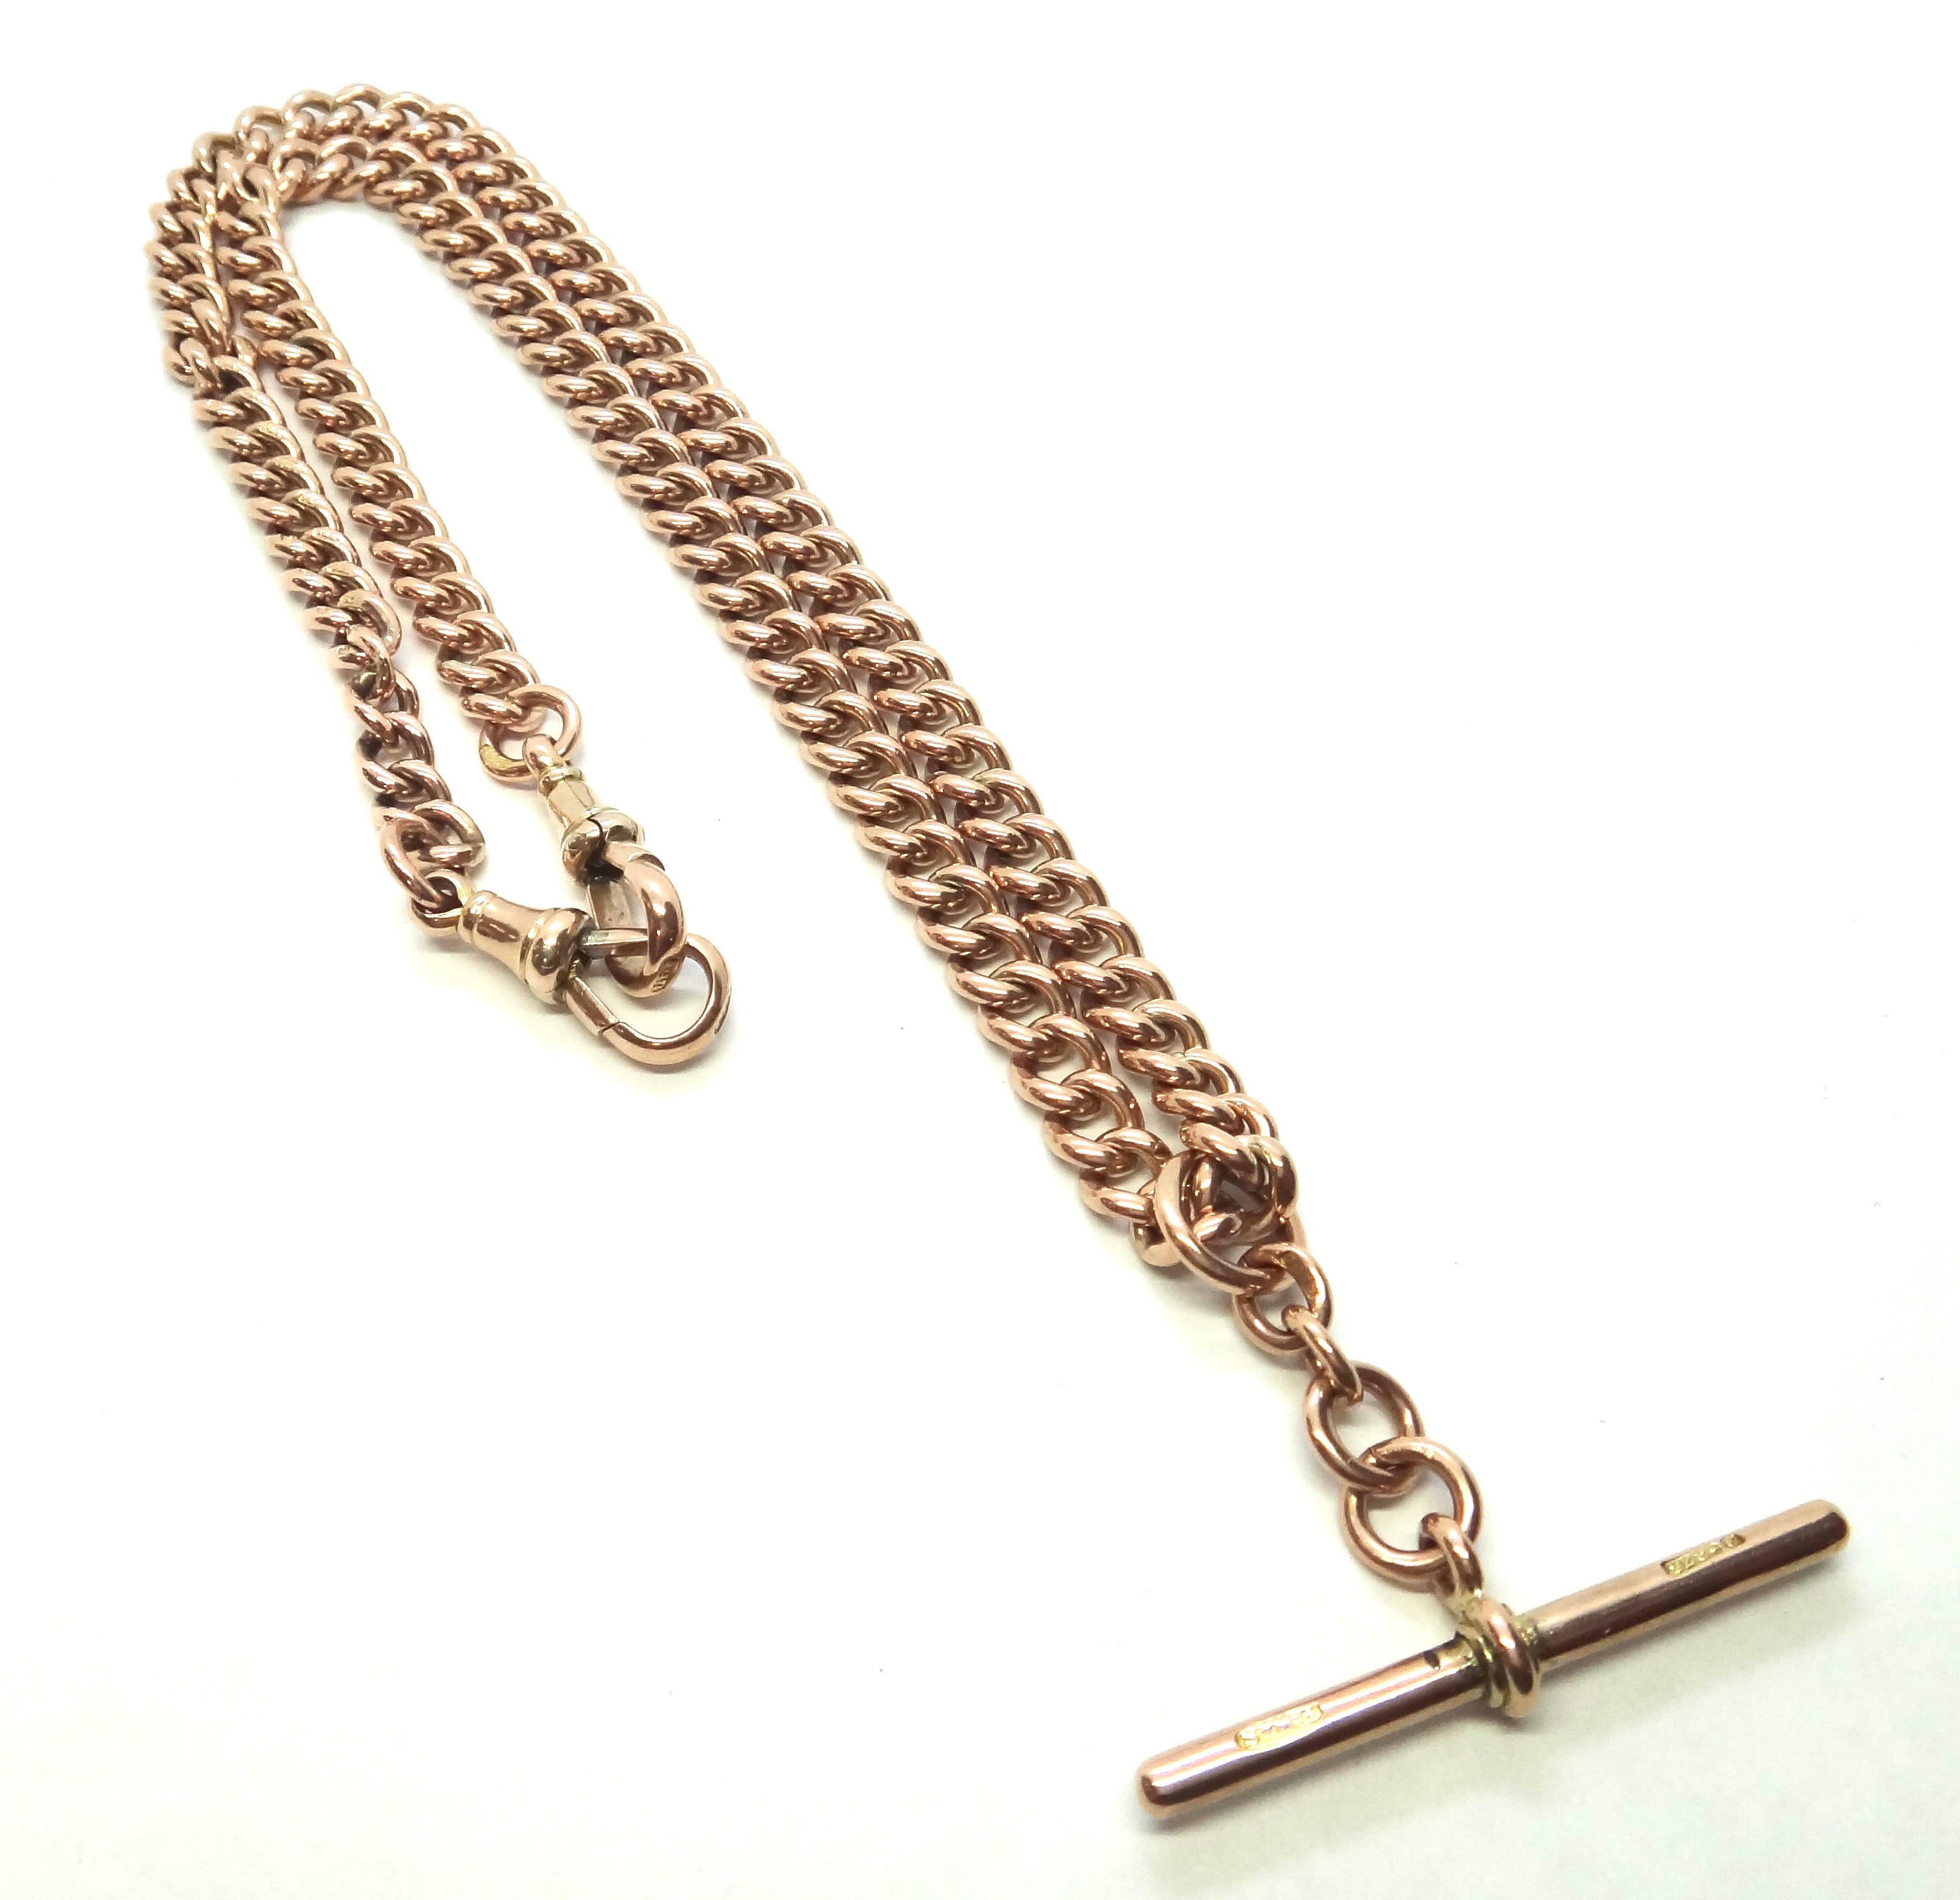 ANTIQUE 9ct Rose GOLD Albert/Fob Chain Necklace c.1900